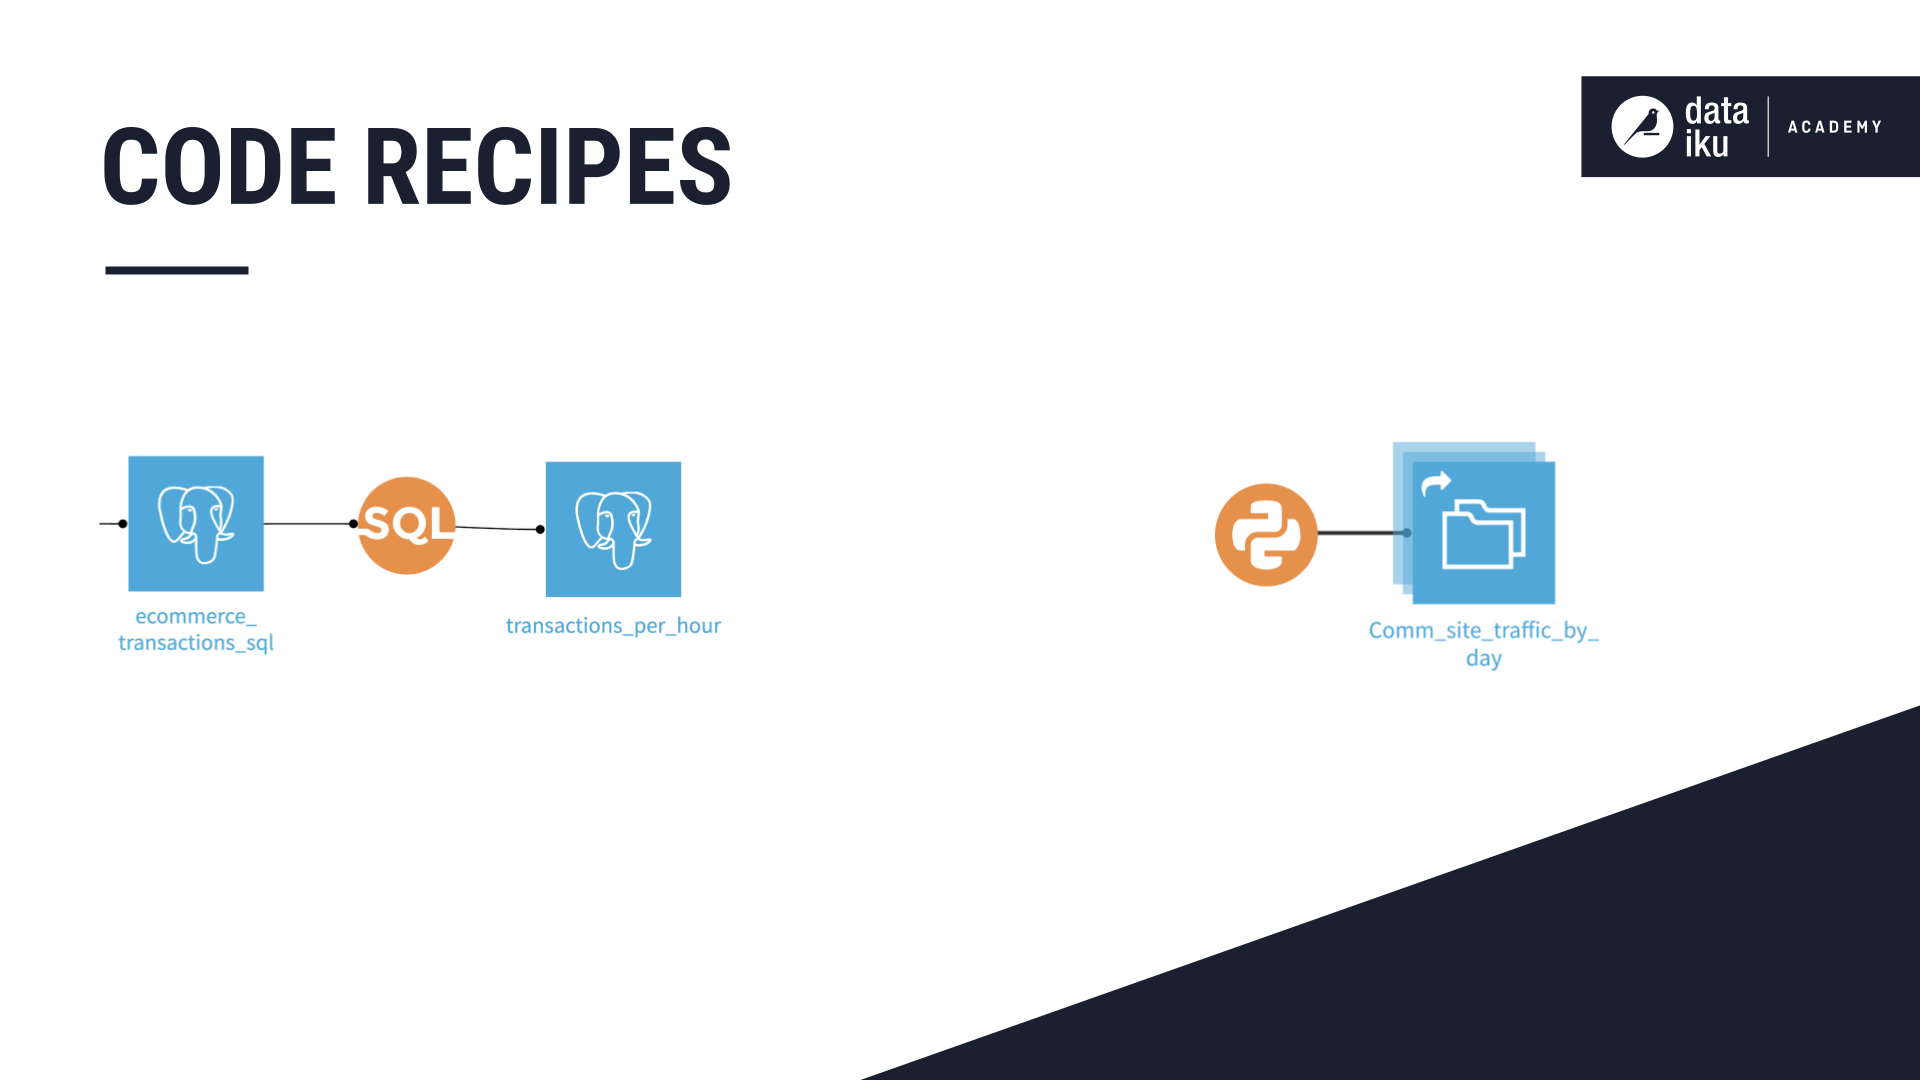 Slide depicting how code recipes can have input datasets but don't require one.